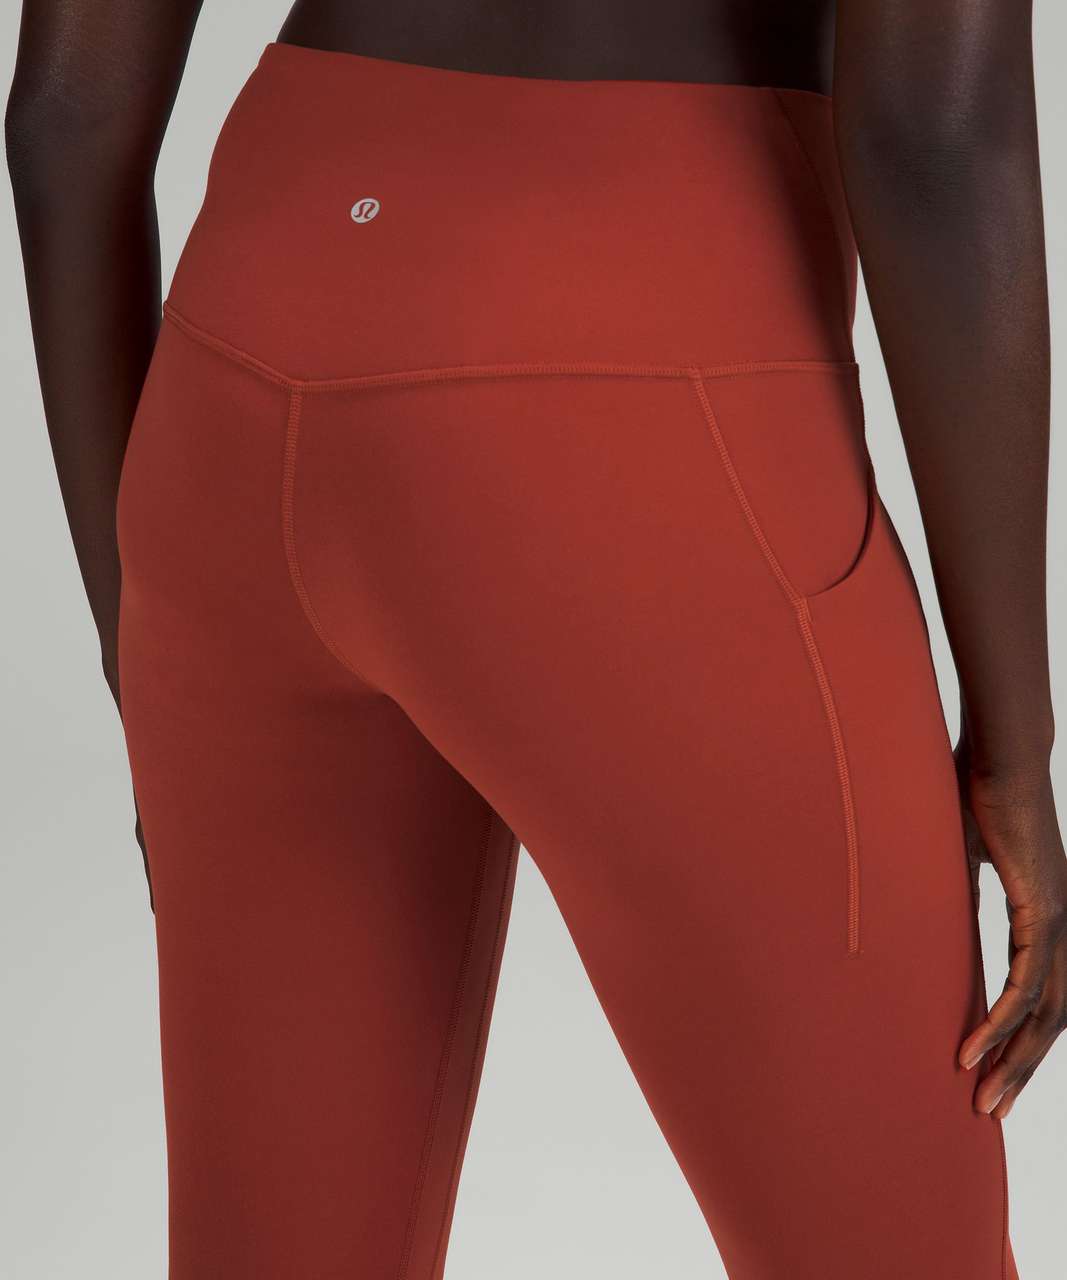 Lululemon Align High-Rise Crop with Pockets 23" - Cayenne